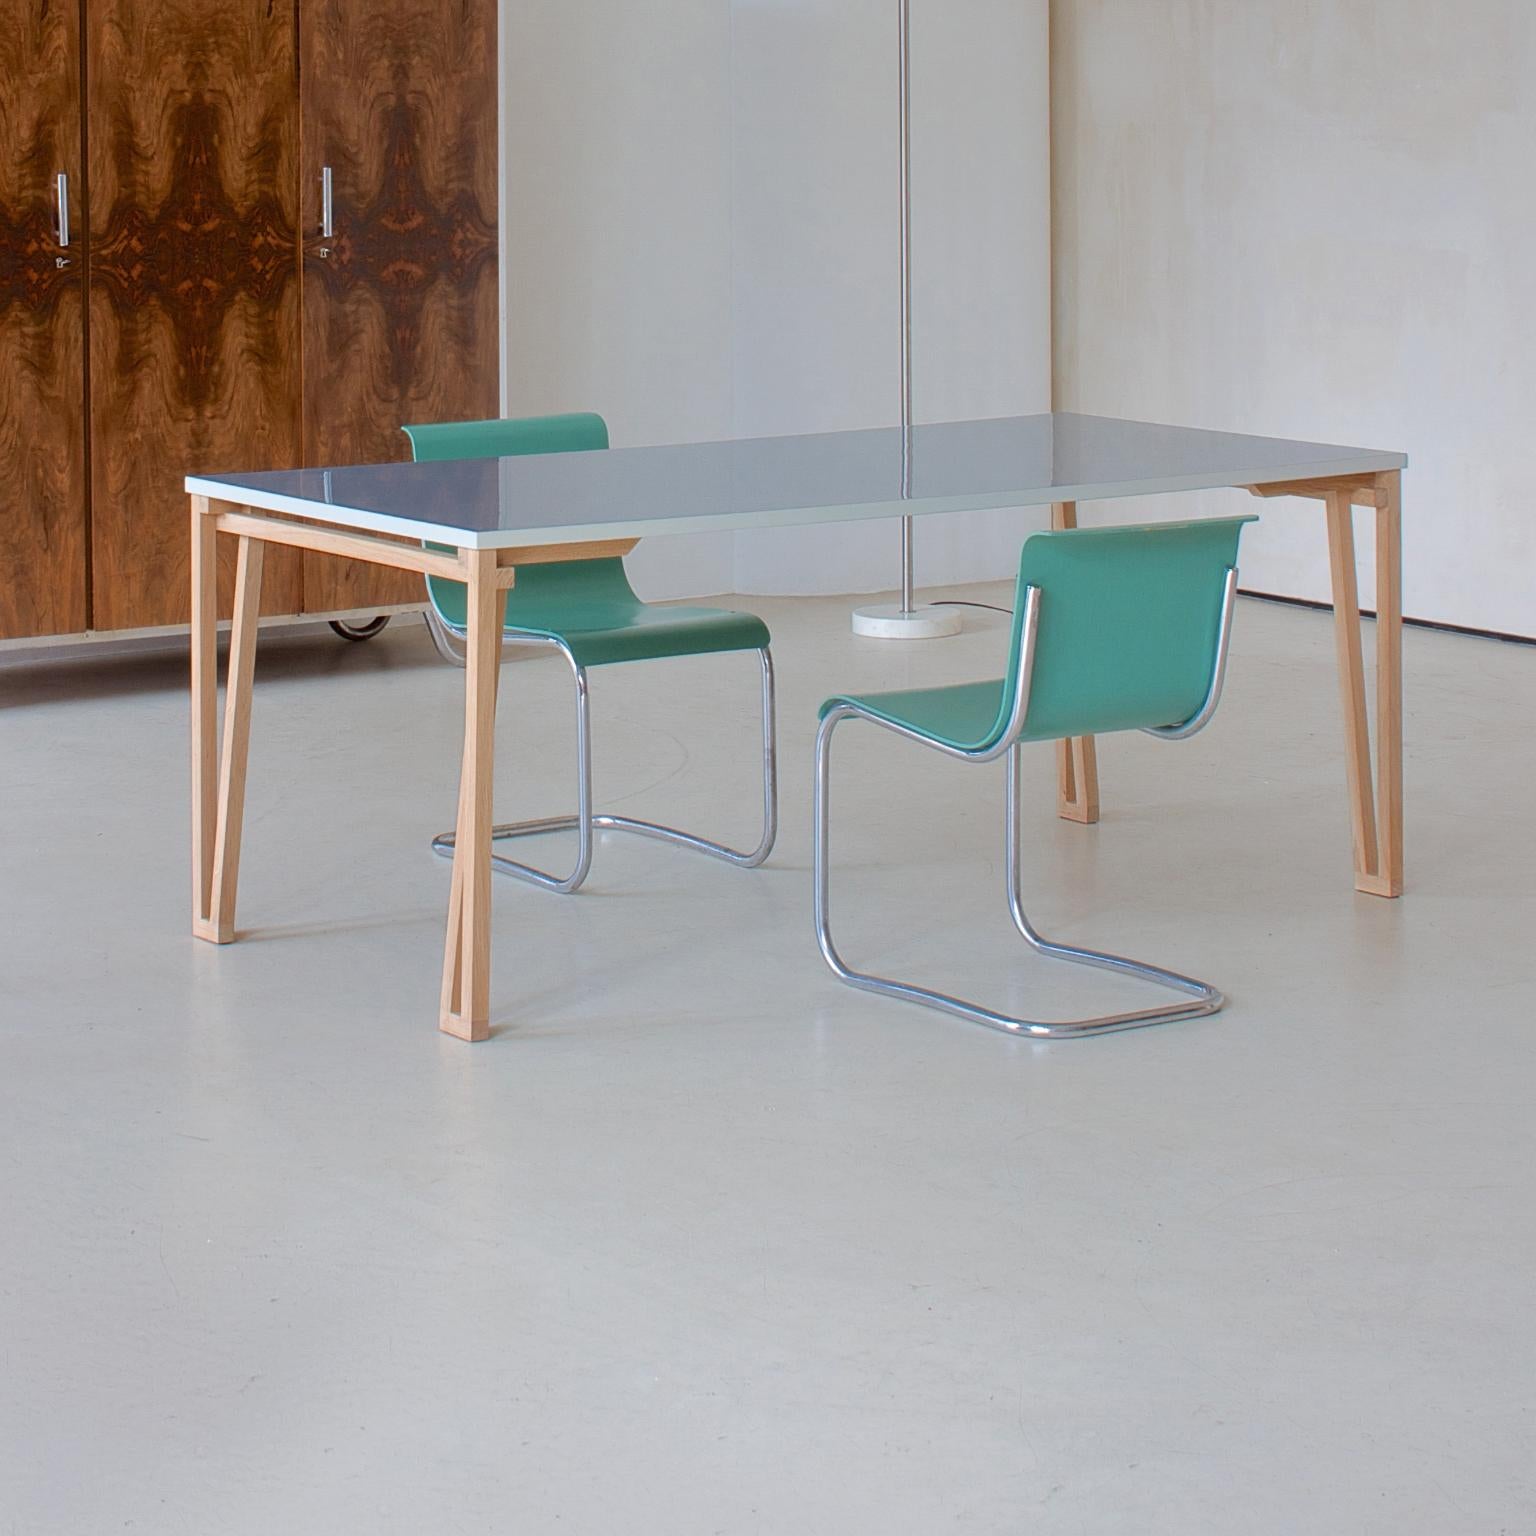 Minimalist Modern Contemporary Handcrafted Wooden Table, Customisable, by GMD Berlin, 2014 For Sale